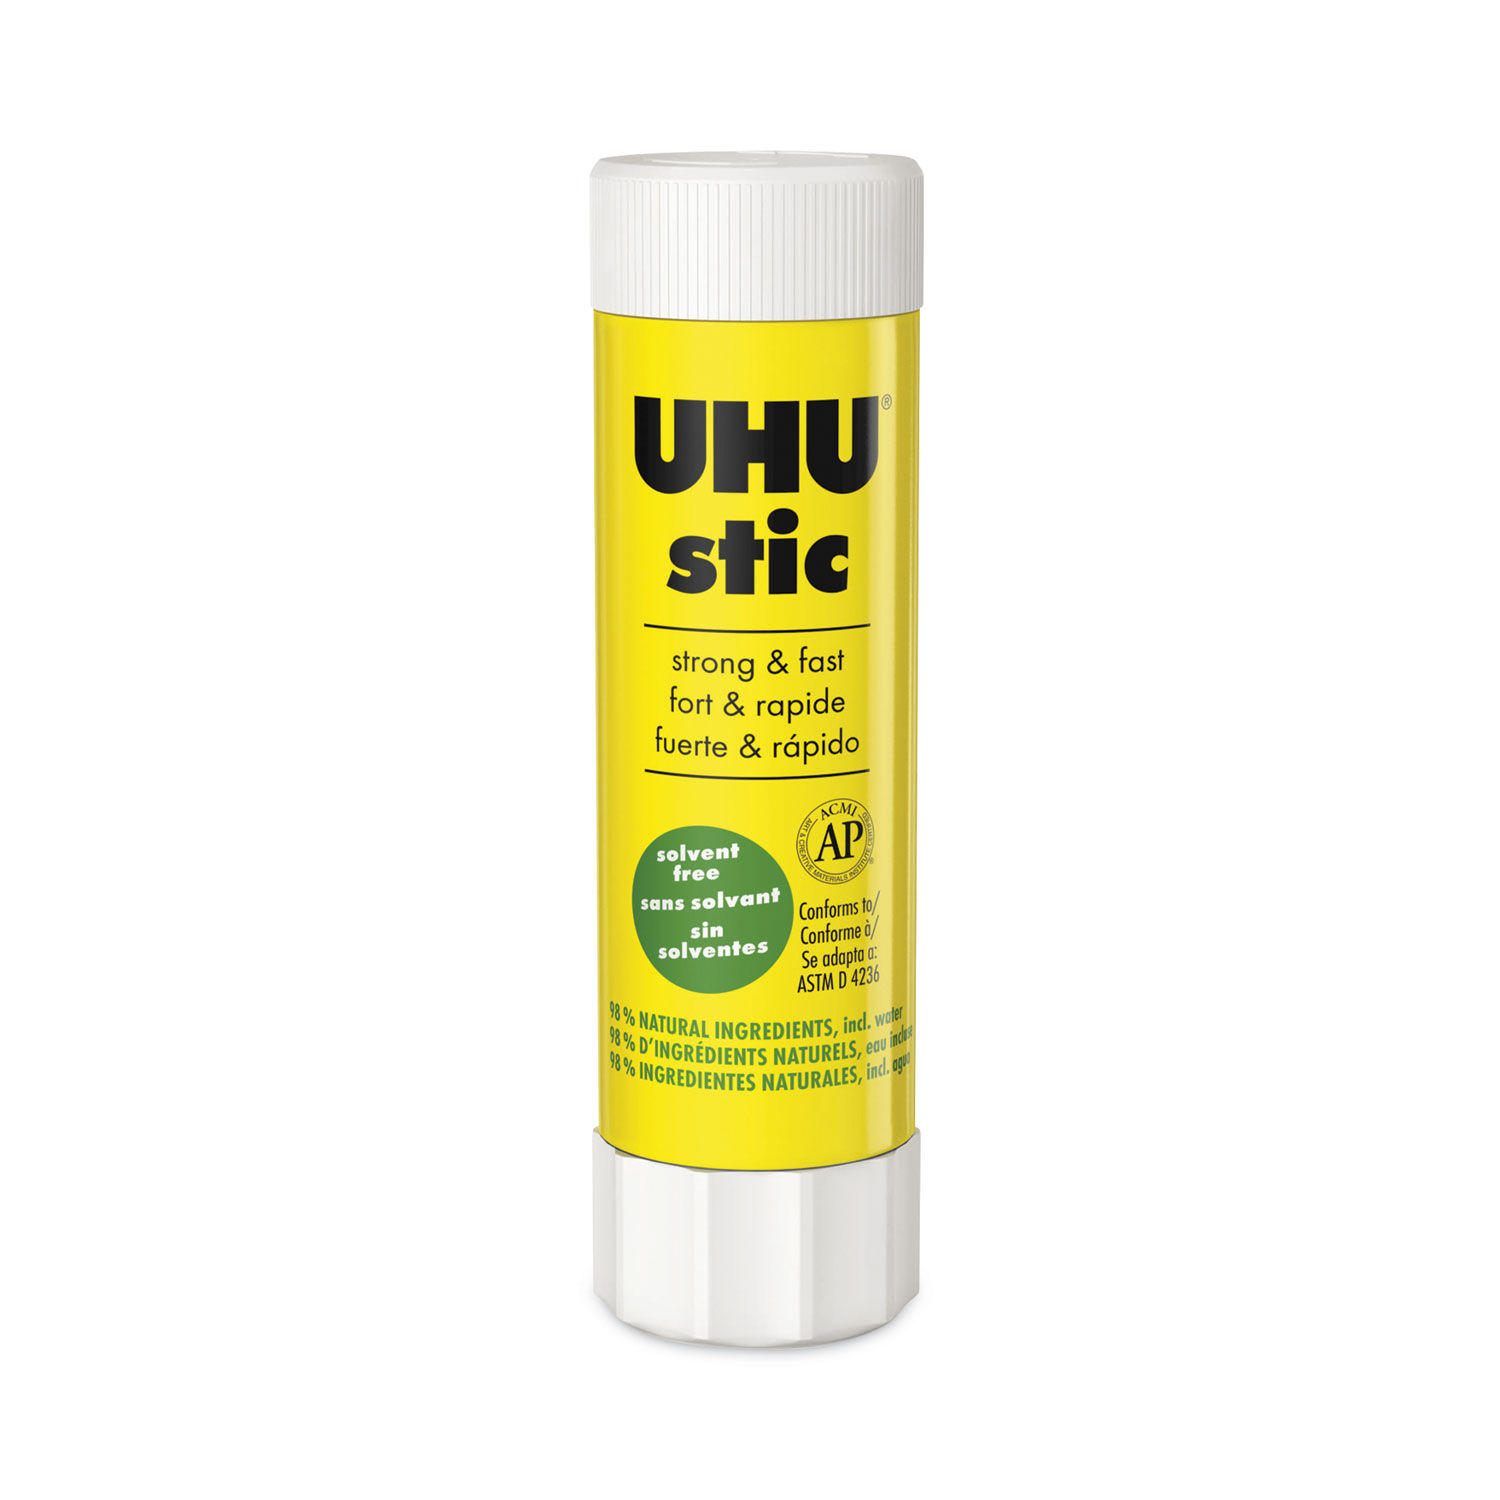 Pompotops 50ml Strong Universal Glue--Thick Sticky Adhesive for Plastic, Wood and DIY Crafts, Size: Small, Yellow